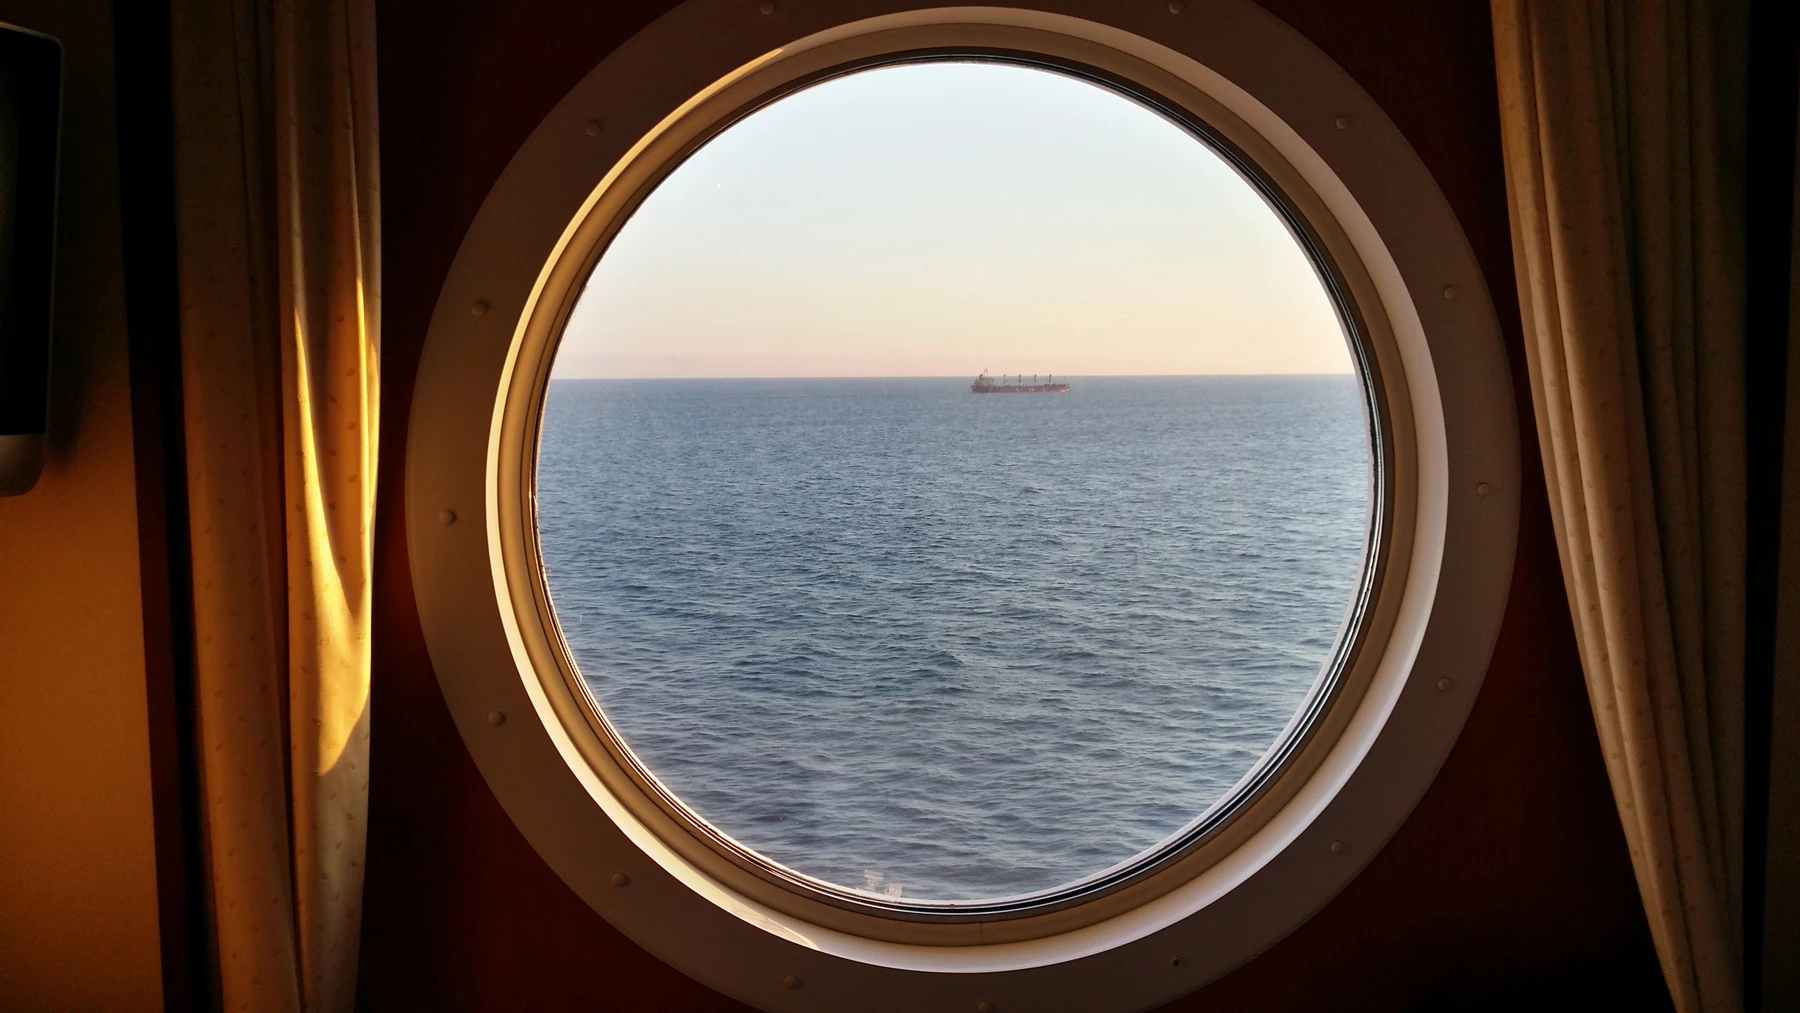 A view of the ocean from a round cruise ship cabin window at sunset